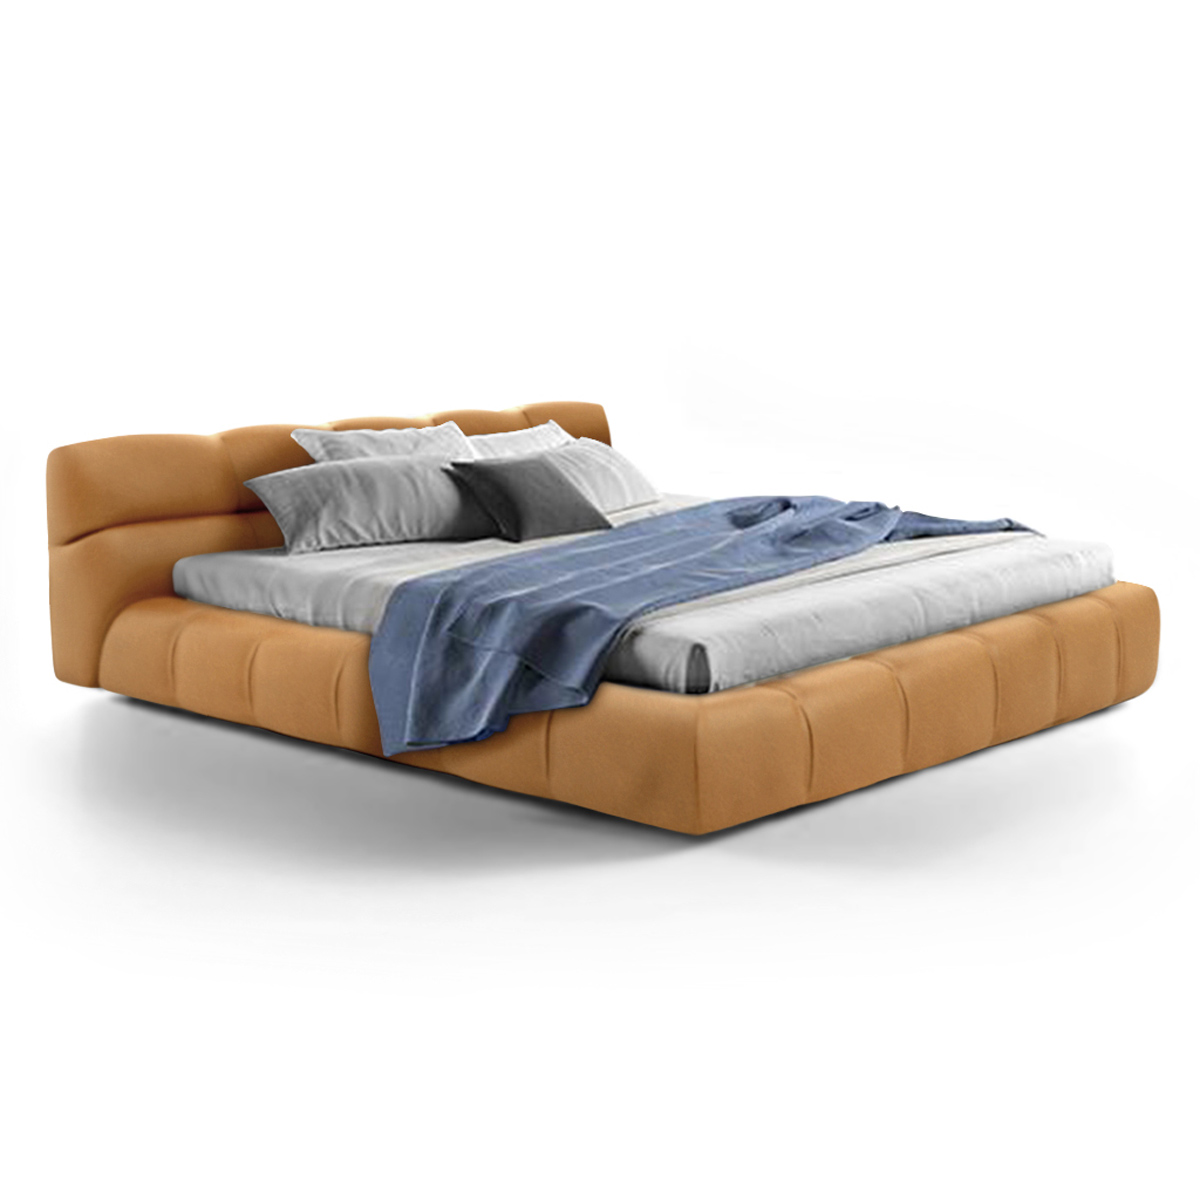 Tufted Bed Aniline Leather-Beige / California King Size